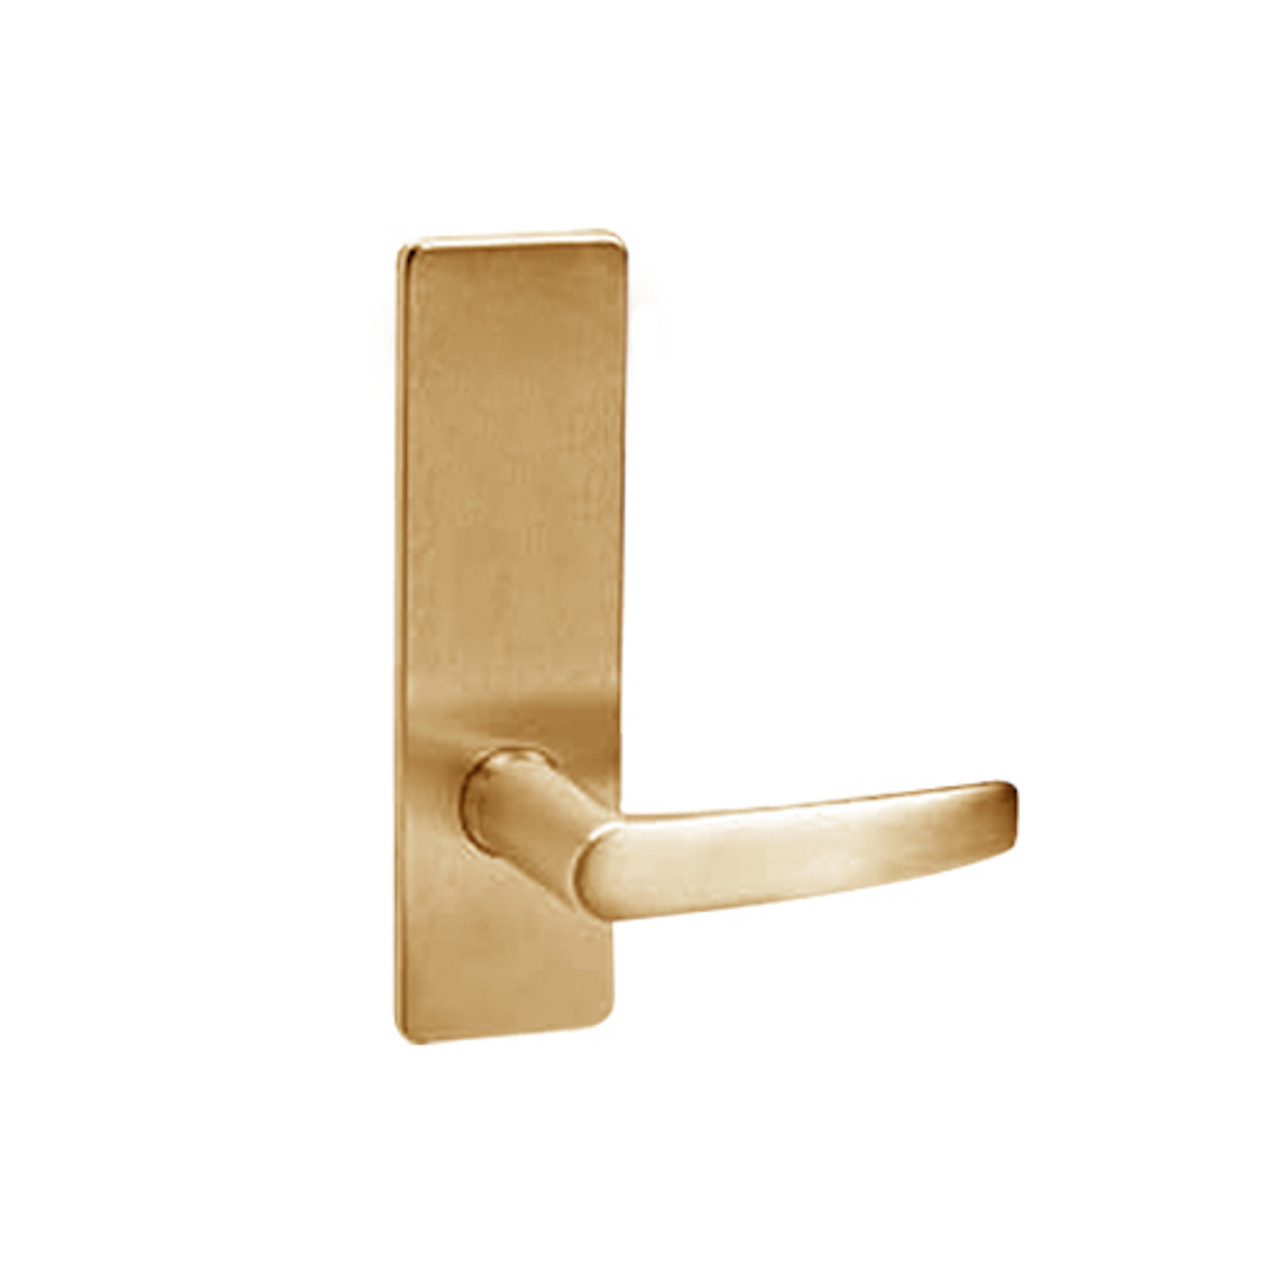 ML2020-ASN-612 Corbin Russwin ML2000 Series Mortise Privacy Locksets with Armstrong Lever in Satin Bronze